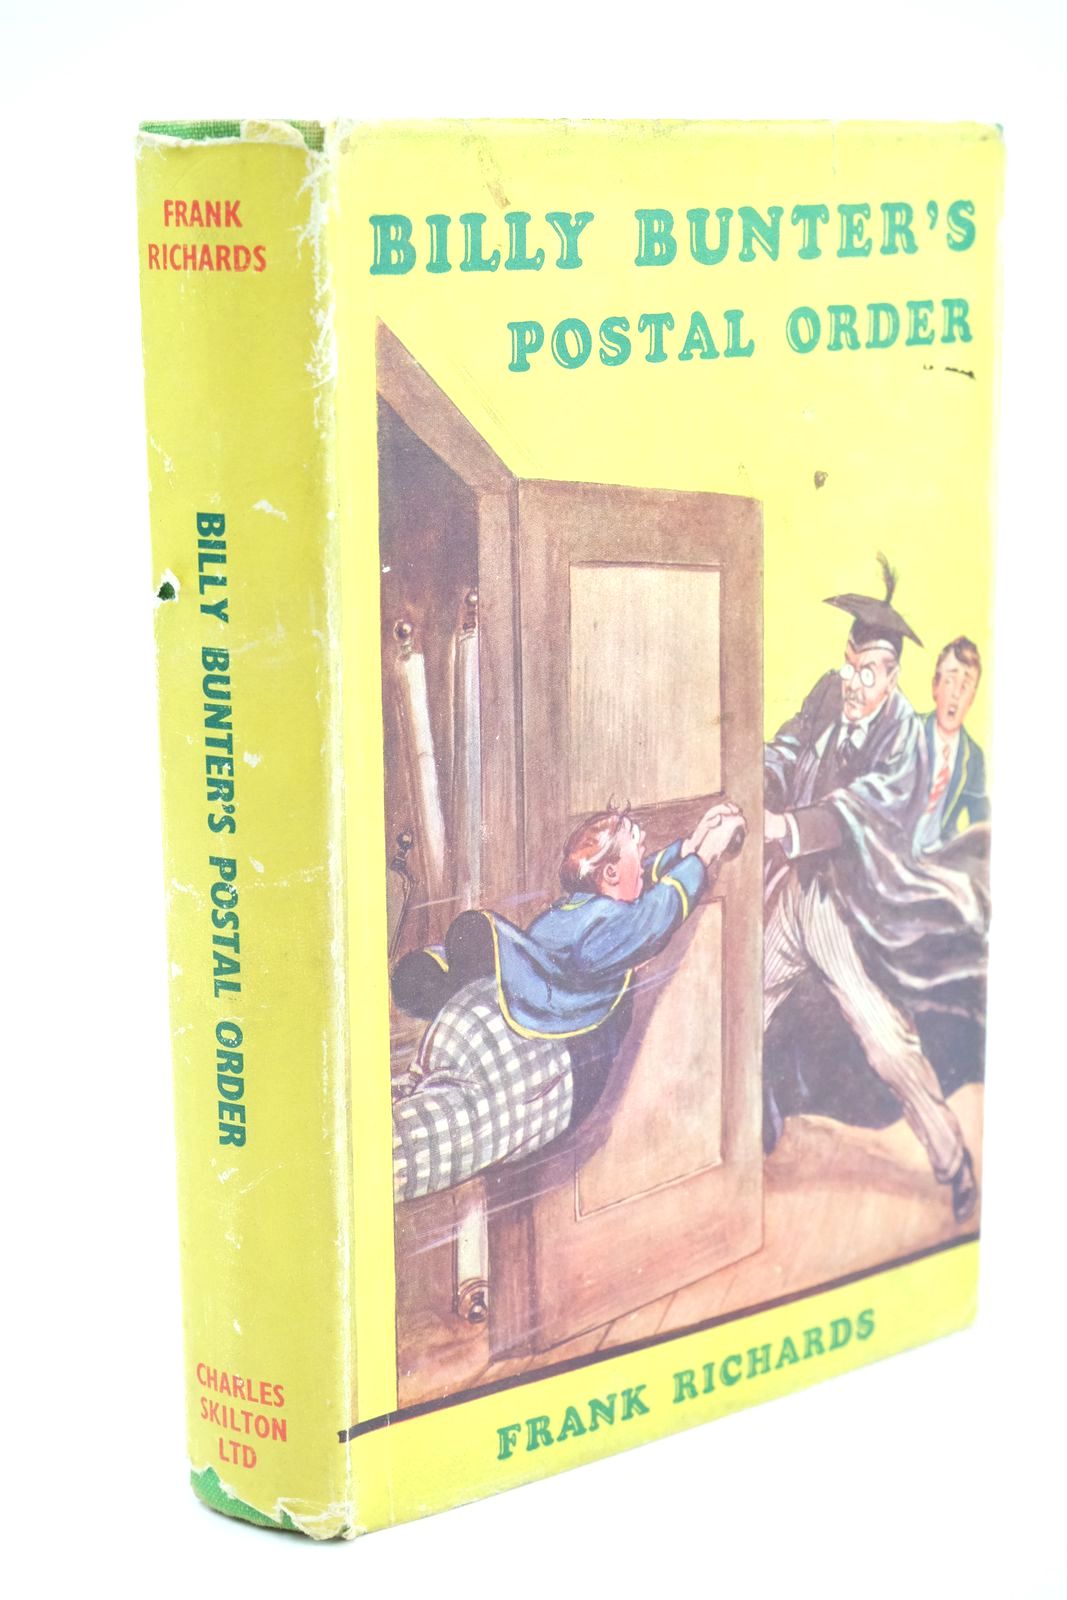 Photo of BILLY BUNTER'S POSTAL ORDER written by Richards, Frank illustrated by Macdonald, R.J. published by Charles Skilton Ltd. (STOCK CODE: 1323899)  for sale by Stella & Rose's Books